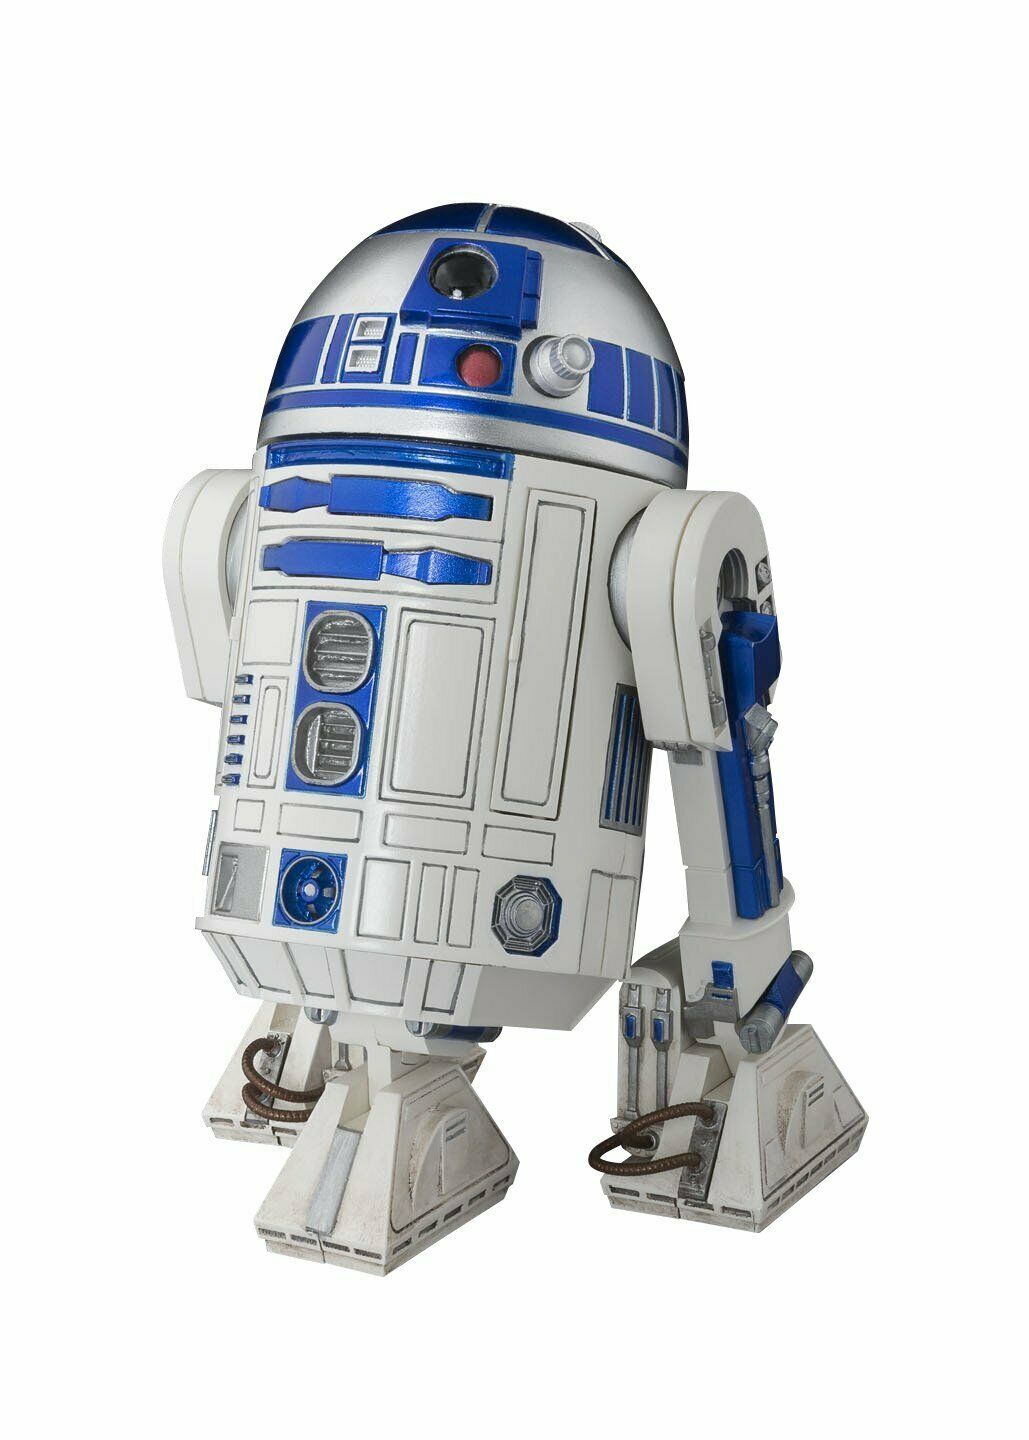 S.H. Figuarts R2-D2 Star Wars A New Hope Action Figure